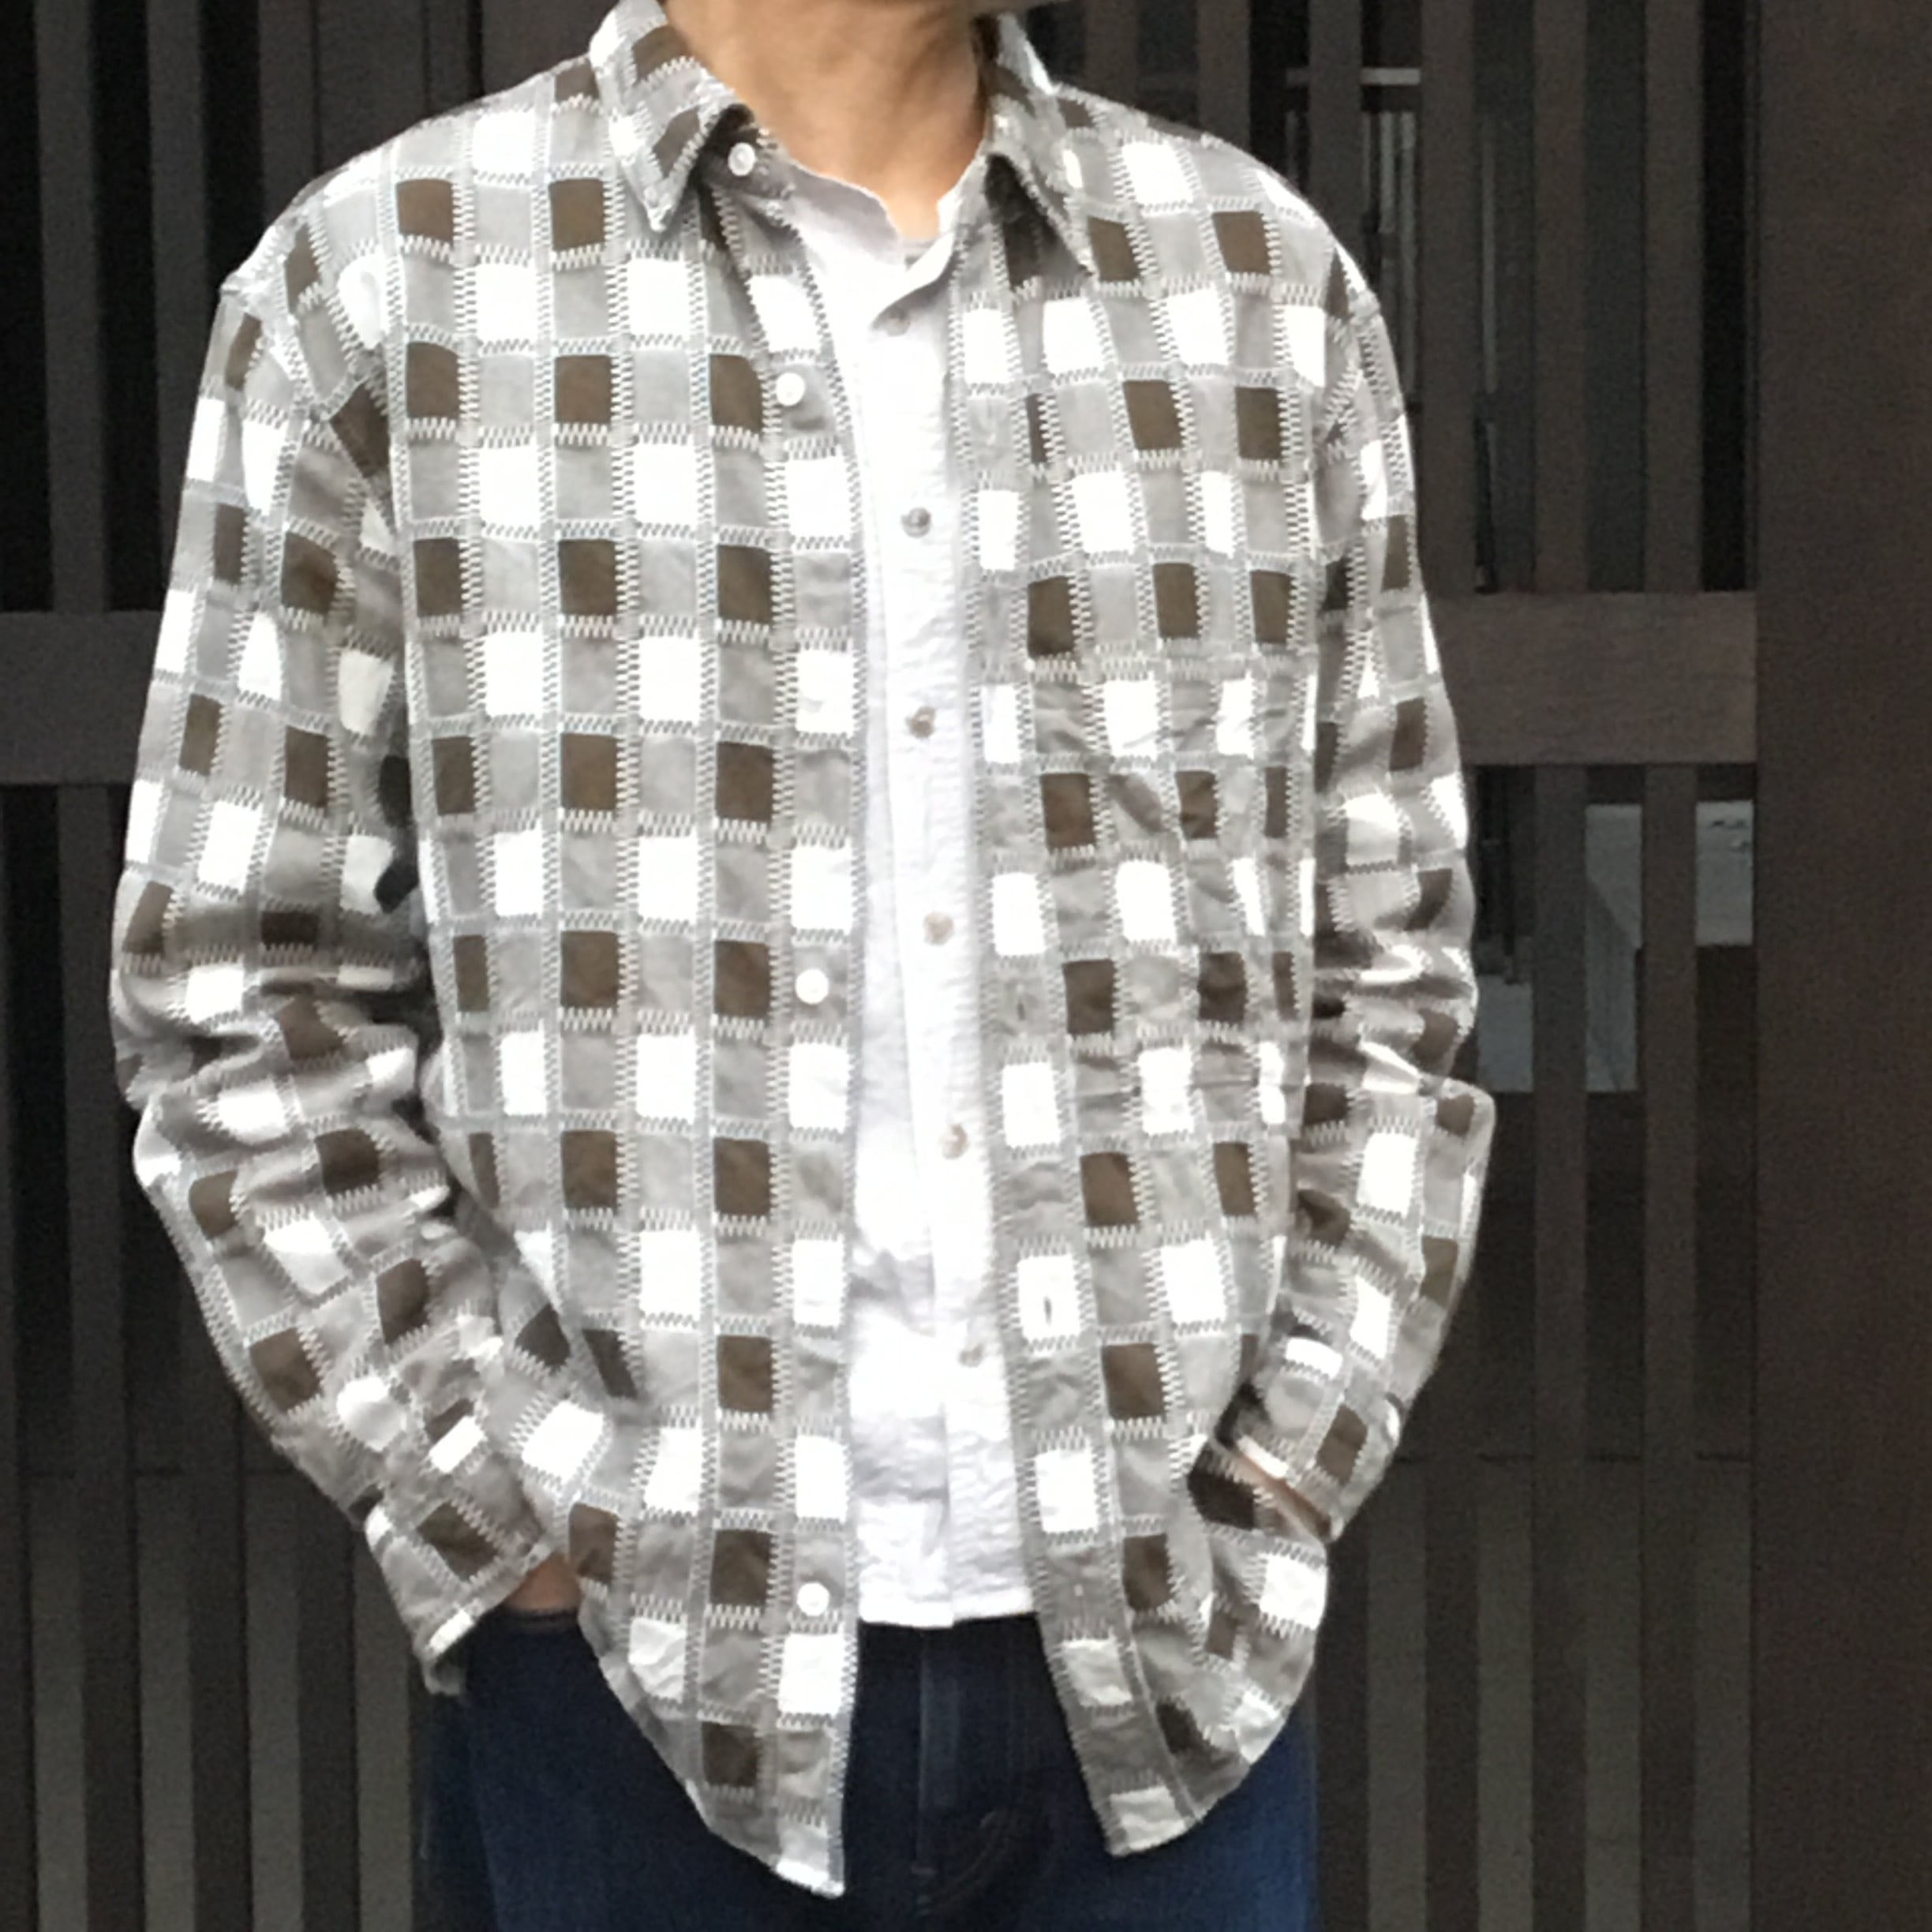 KUON/クオン shirts #2001-SH03 吉野格子 brown check | Routes*Roots powered by BASE